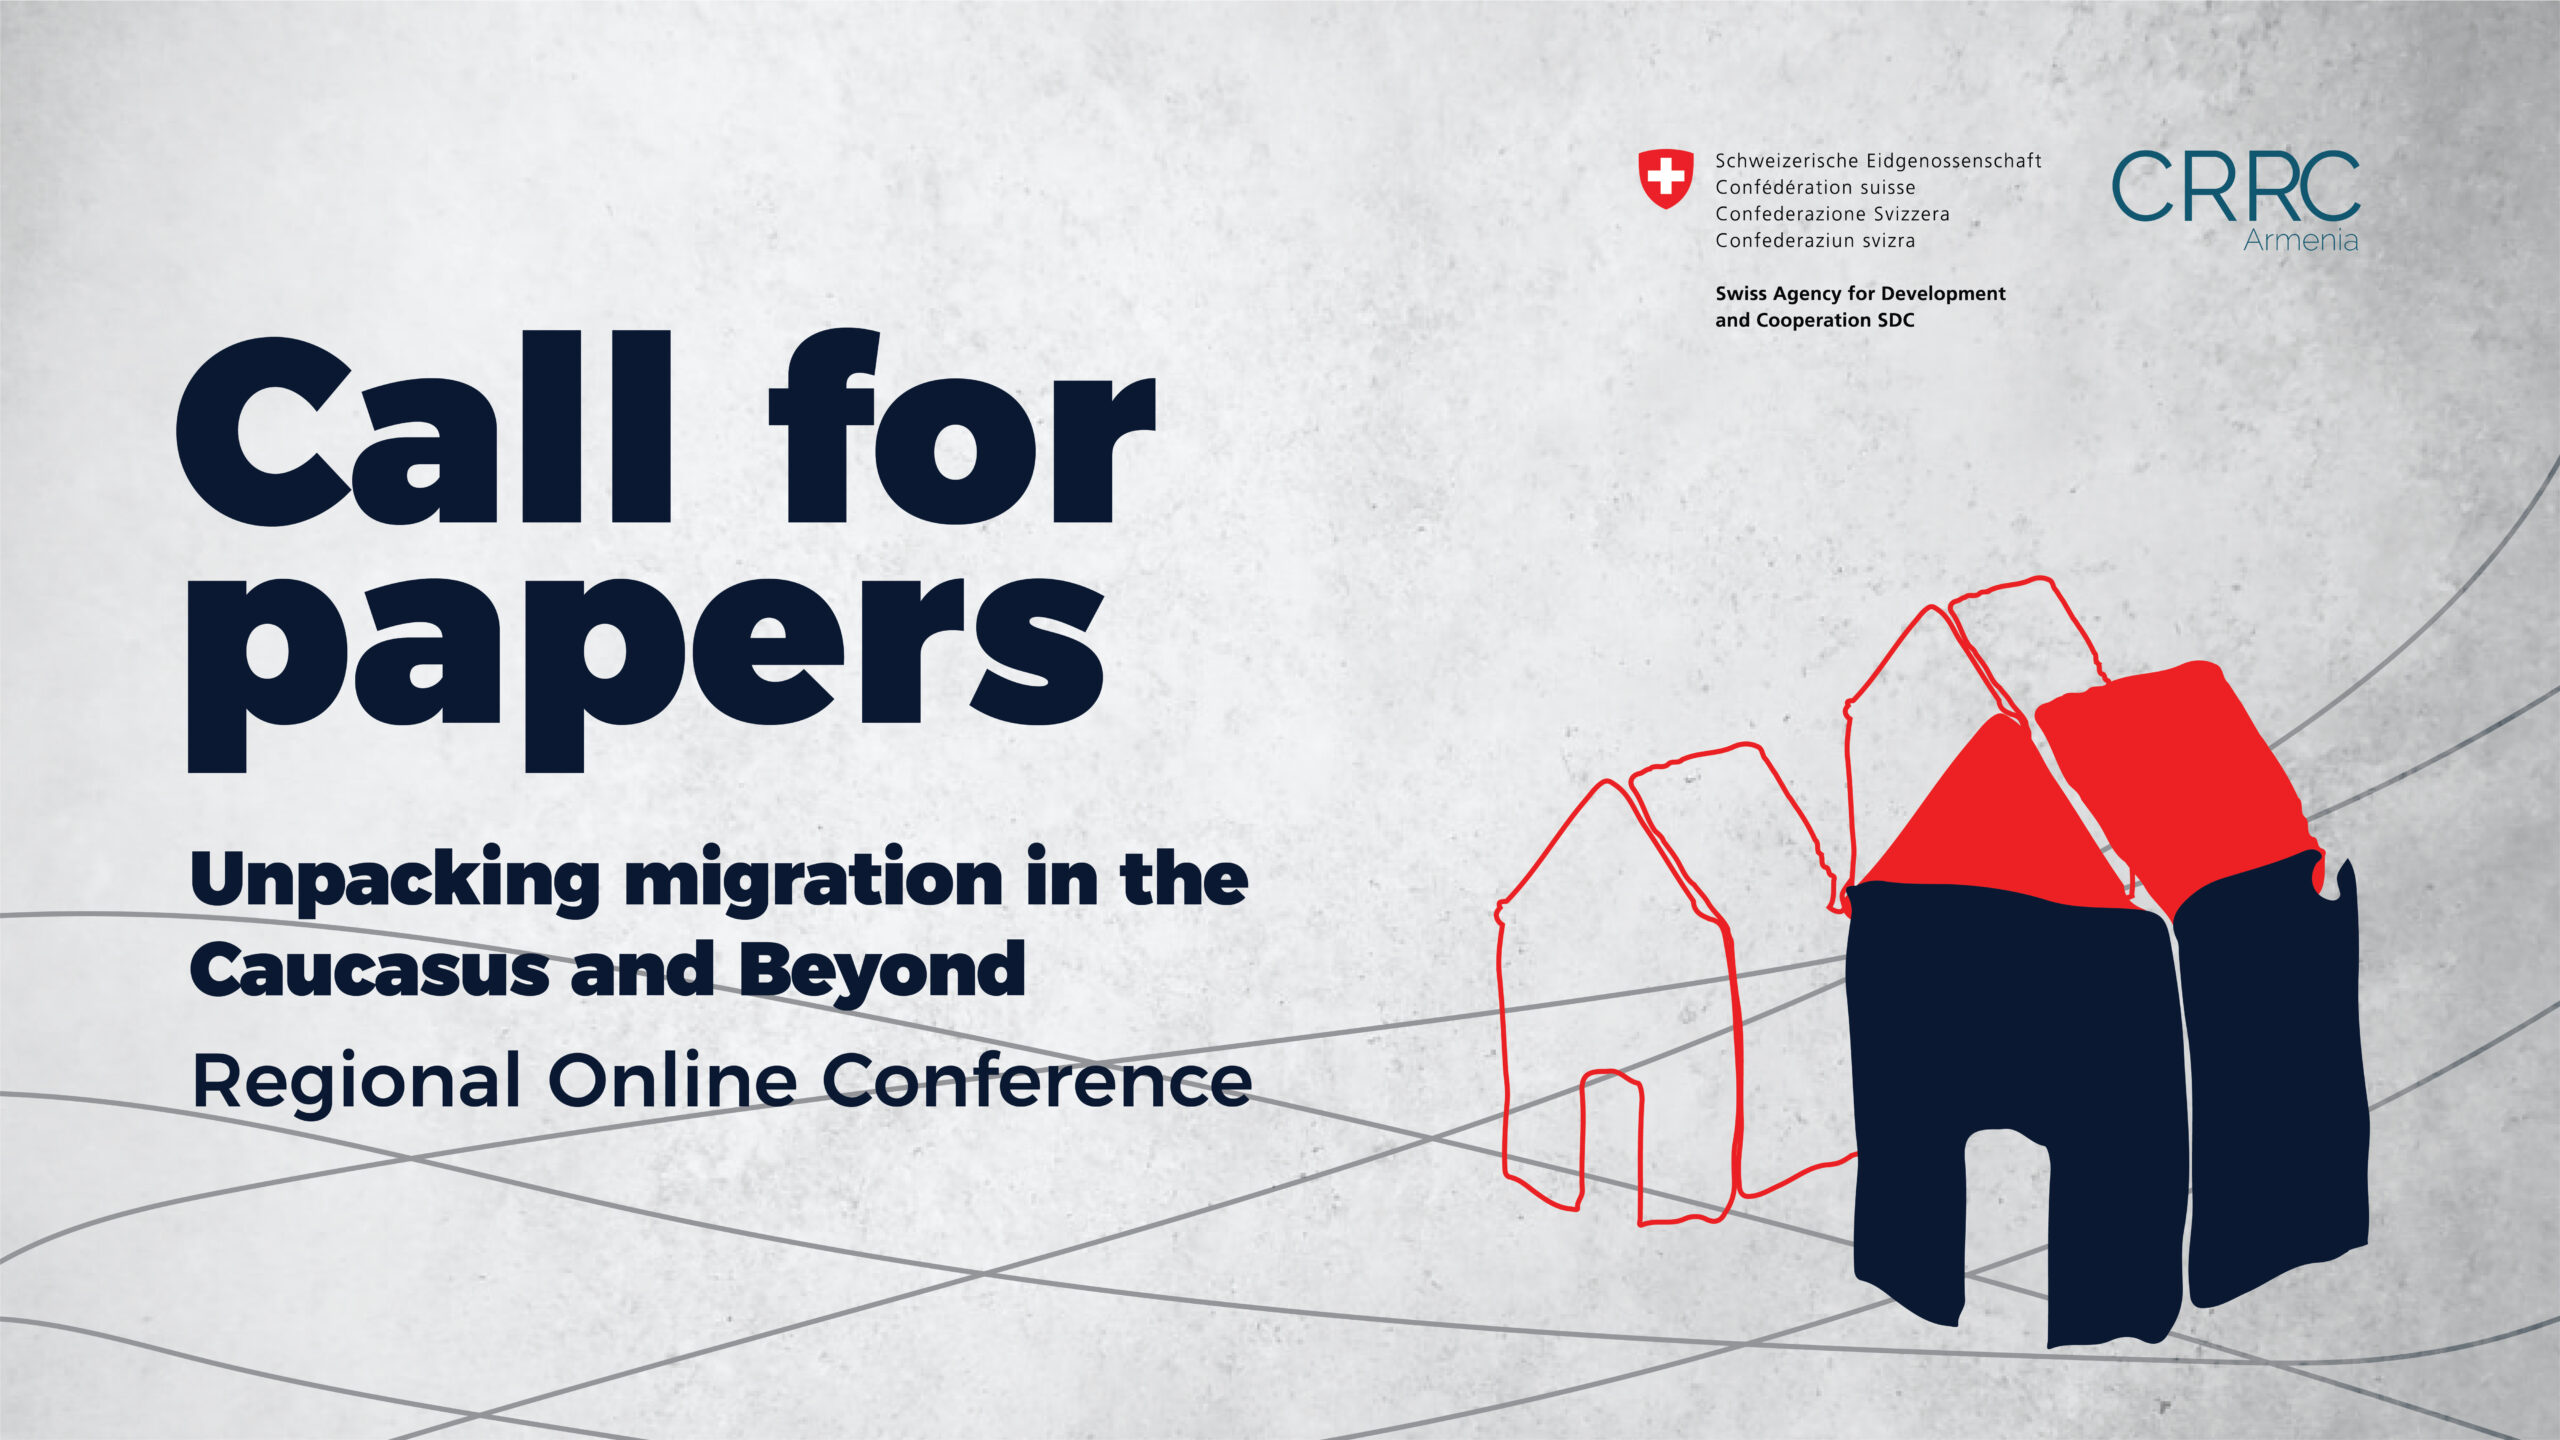 Call for papers: “Unpacking Migration in the Caucasus and Beyond” Regional Online Conference